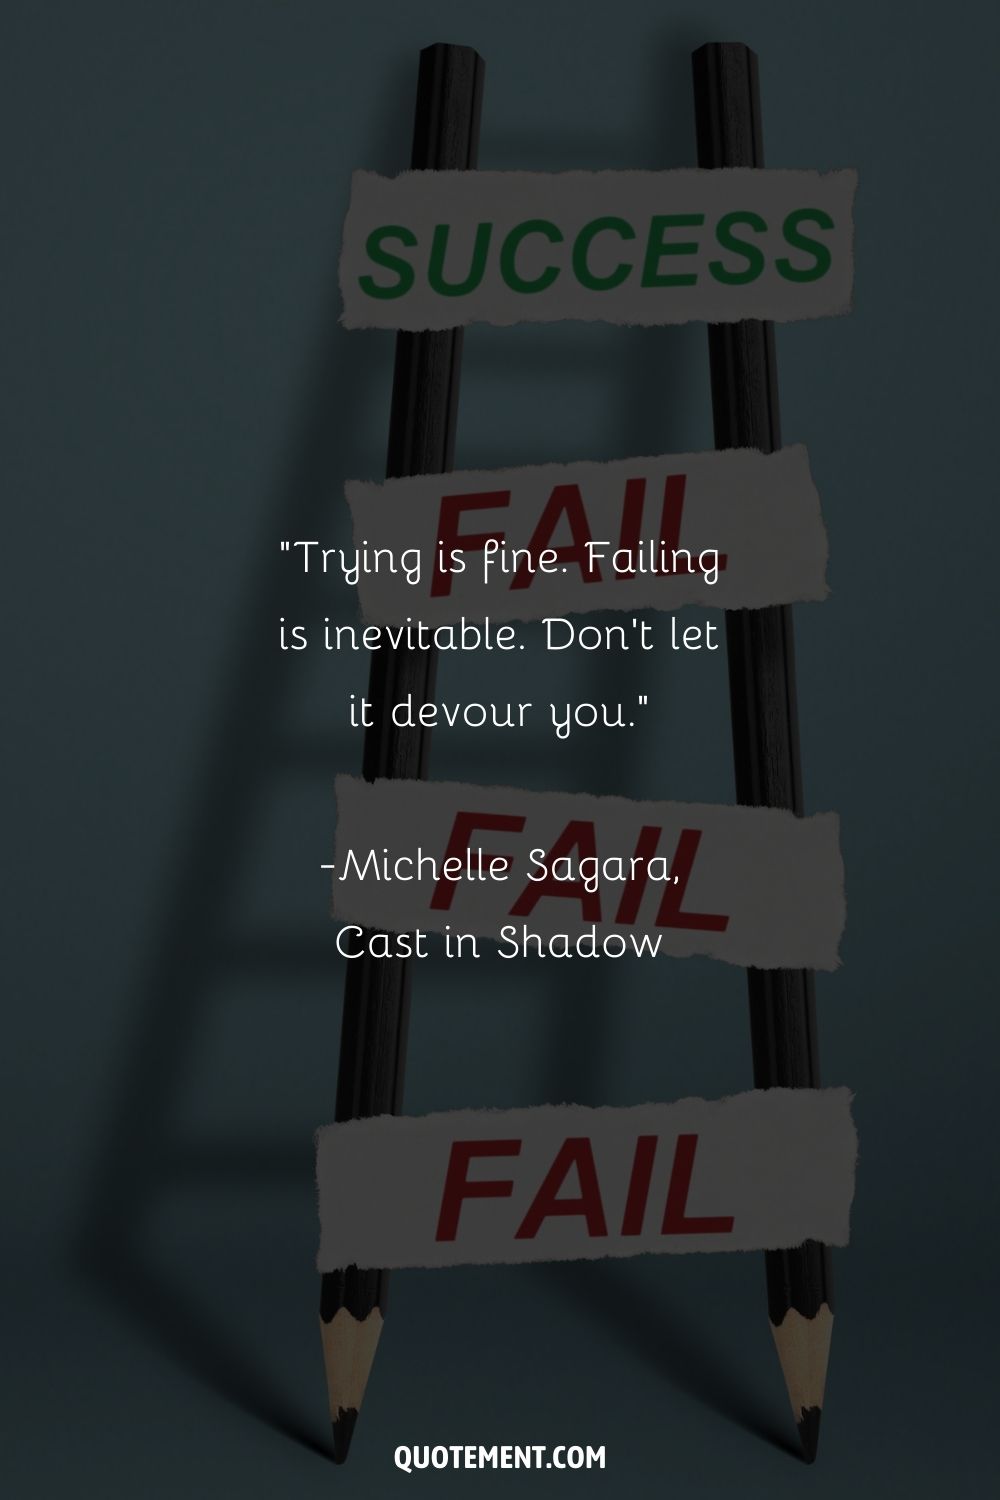 “Trying is fine. Failing is inevitable. Don’t let it devour you.” ― Michelle Sagara, Cast in Shadow